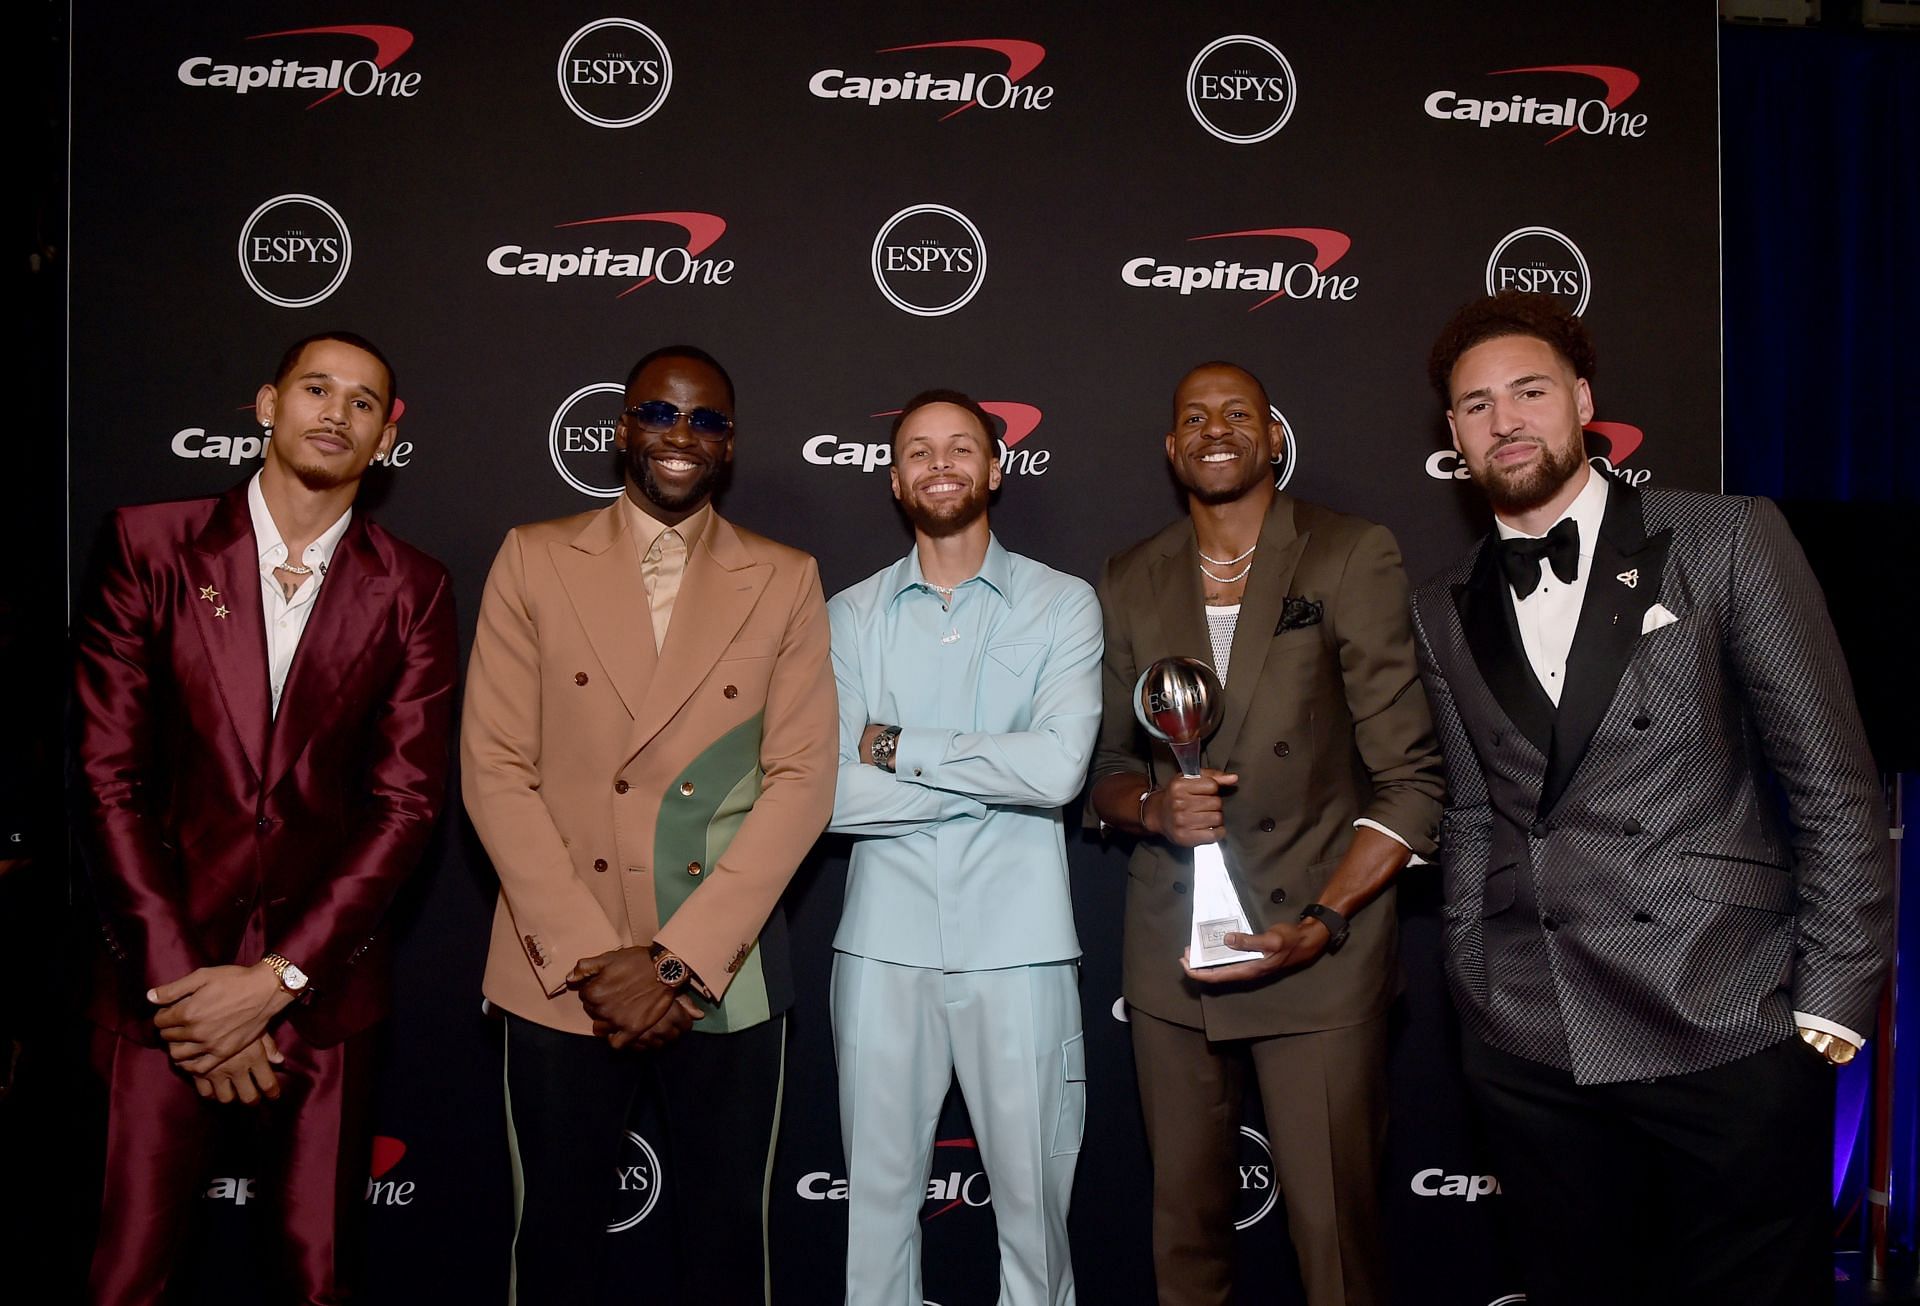 (L-R) Juan Toscano-Anderson, Draymond Green, Steph Curry, Andre Iguodala and &lt;a href=&#039;https://www.sportskeeda.com/player/klay-thompson&#039; target=&#039;_blank&#039; rel=&#039;noopener noreferrer&#039;&gt;Klay Thompson&lt;/a&gt; of the Golden State Warriors, winners of Best Team at the 2022 ESPYs